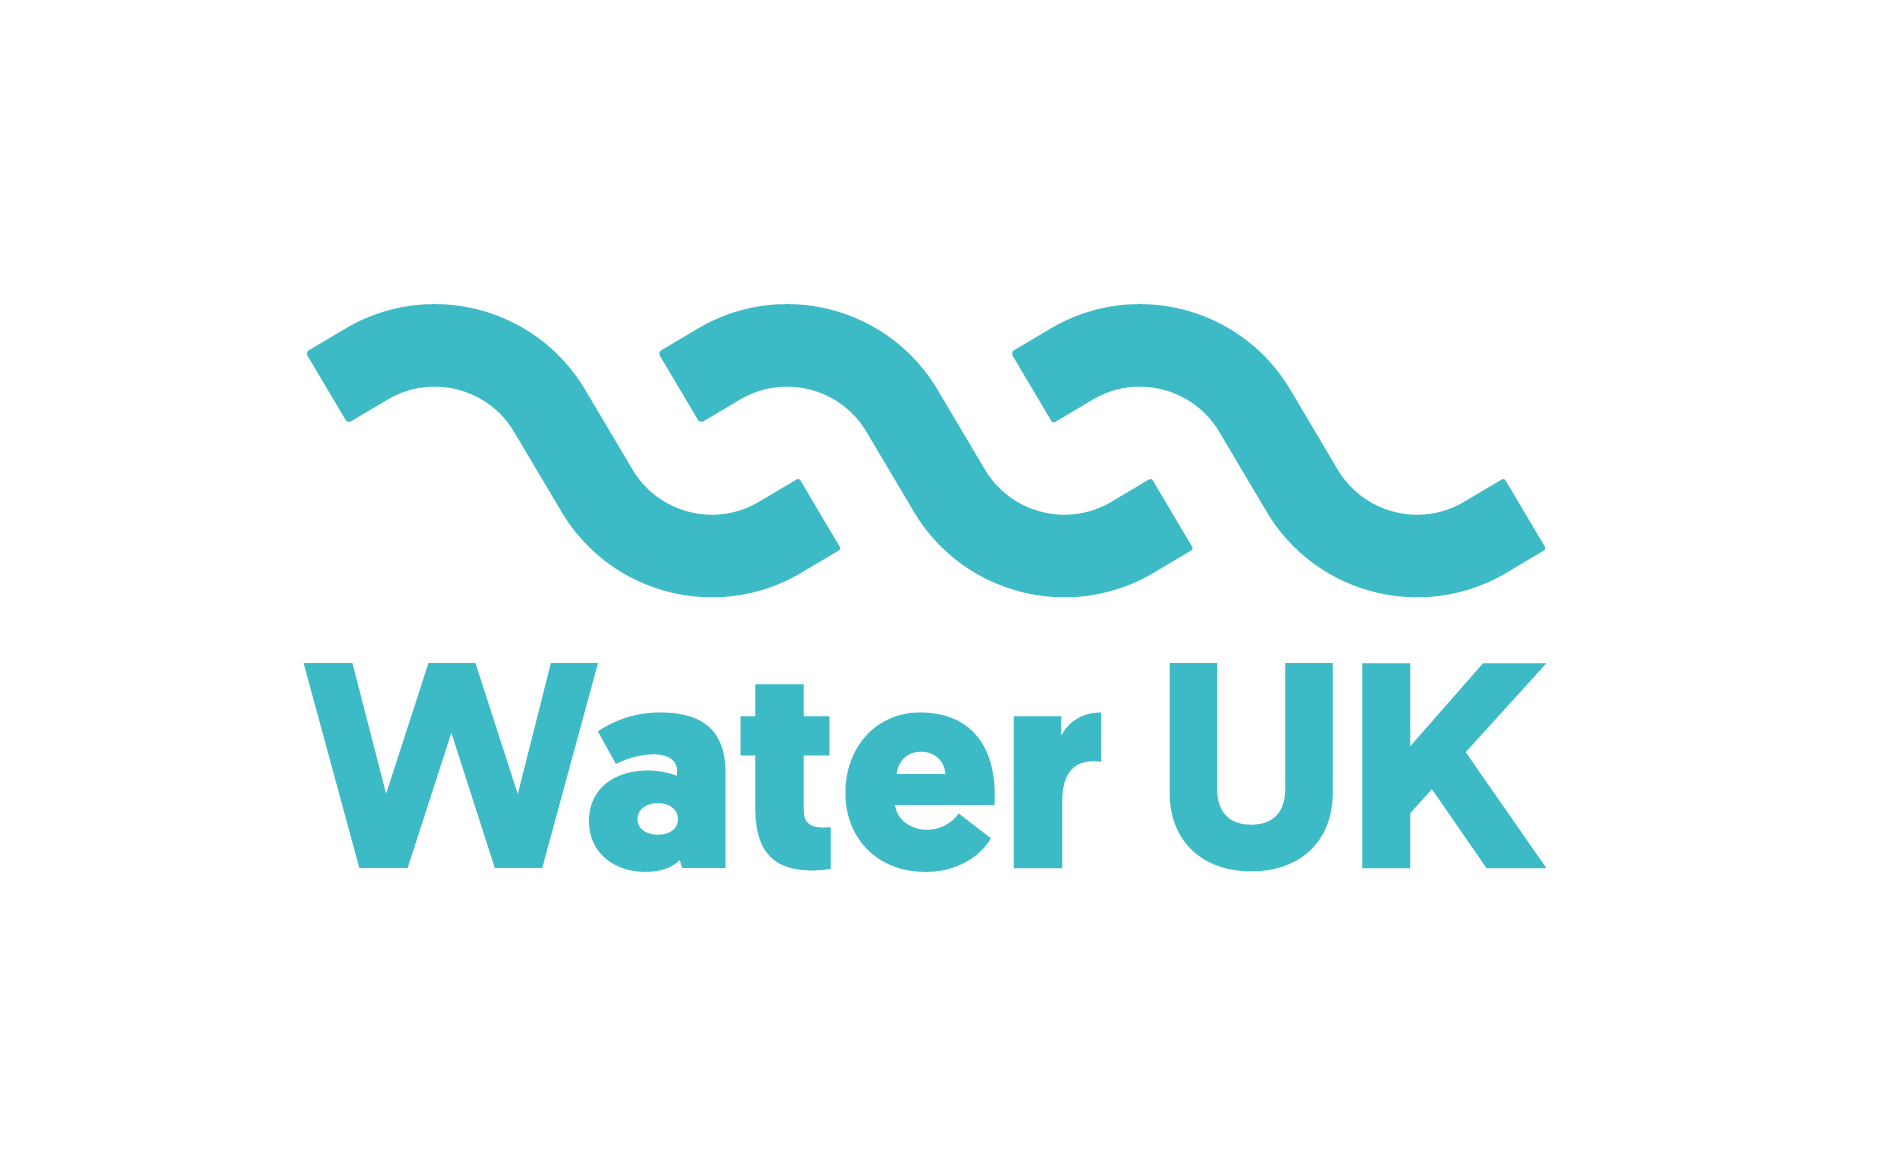 British water companies face $1 bln lawsuits over pollution